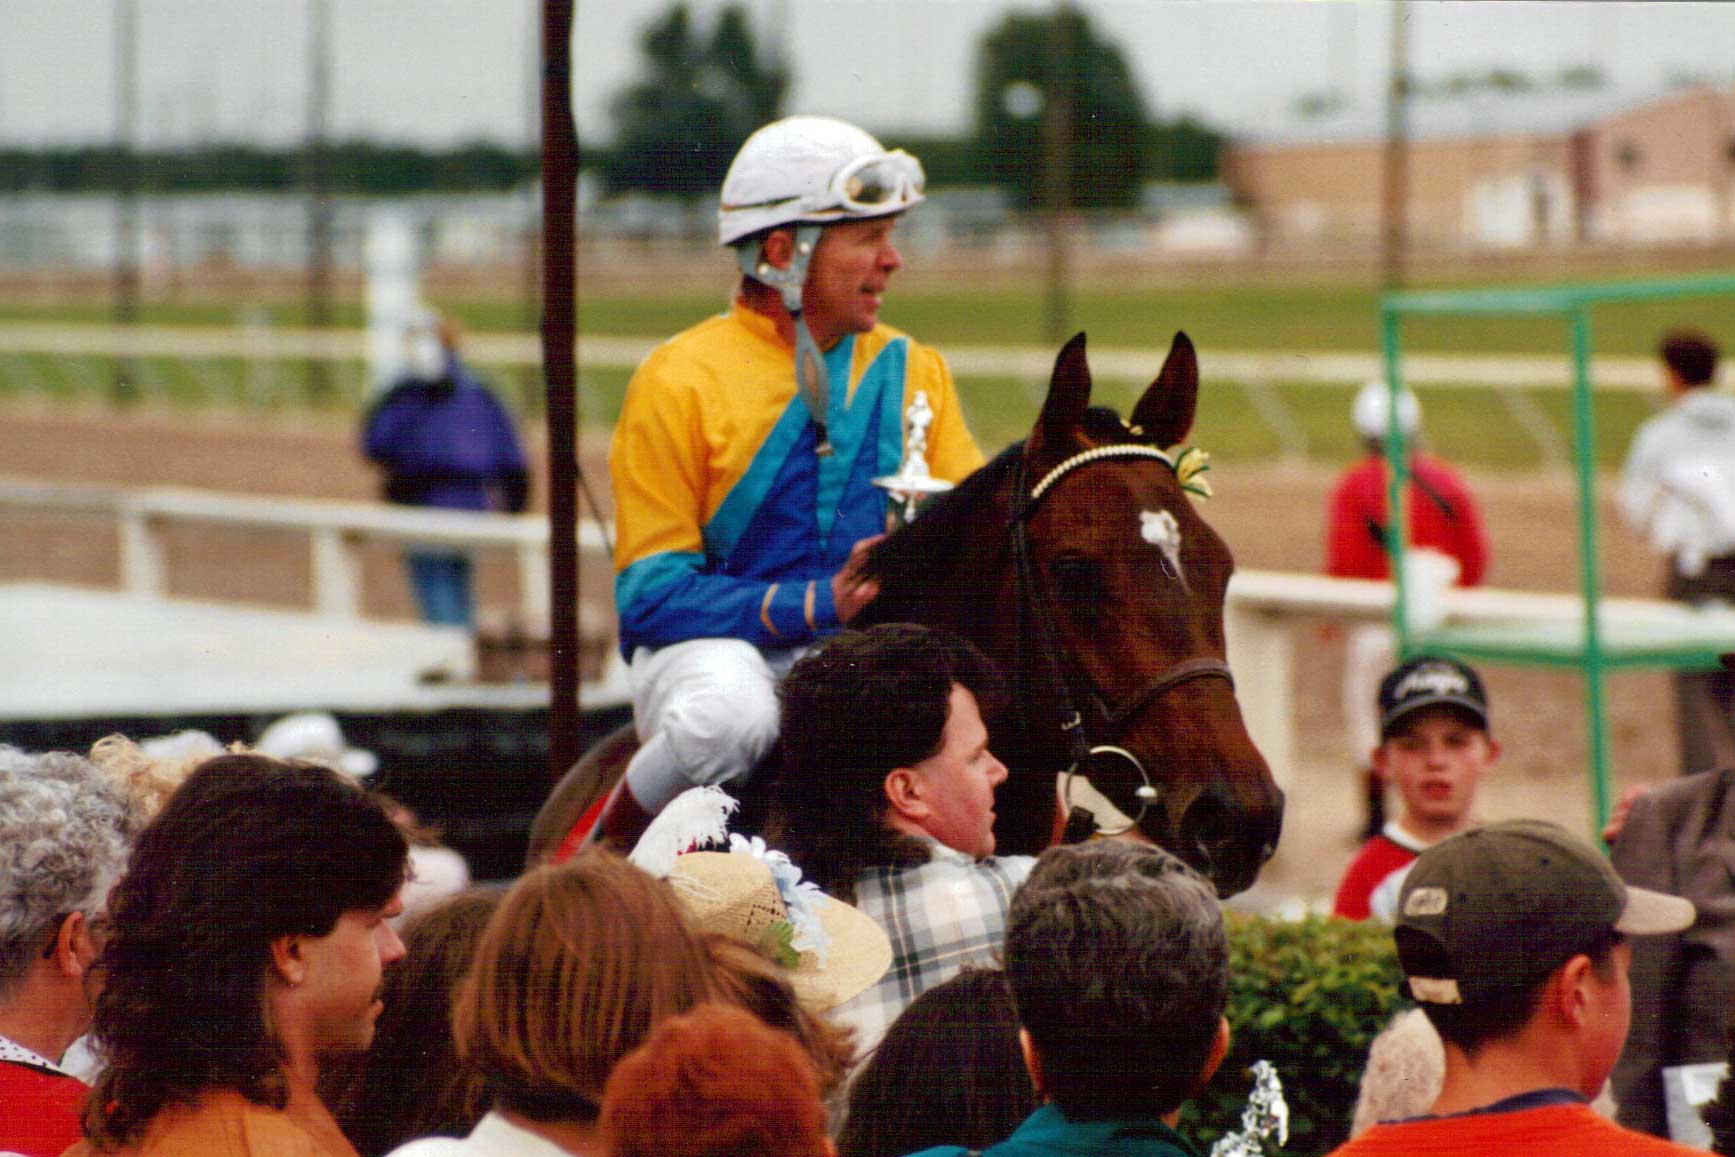 Royal Frolic with Larry Bird up after winning the 45th running of the Manitoba Derby. August 2, 1993.